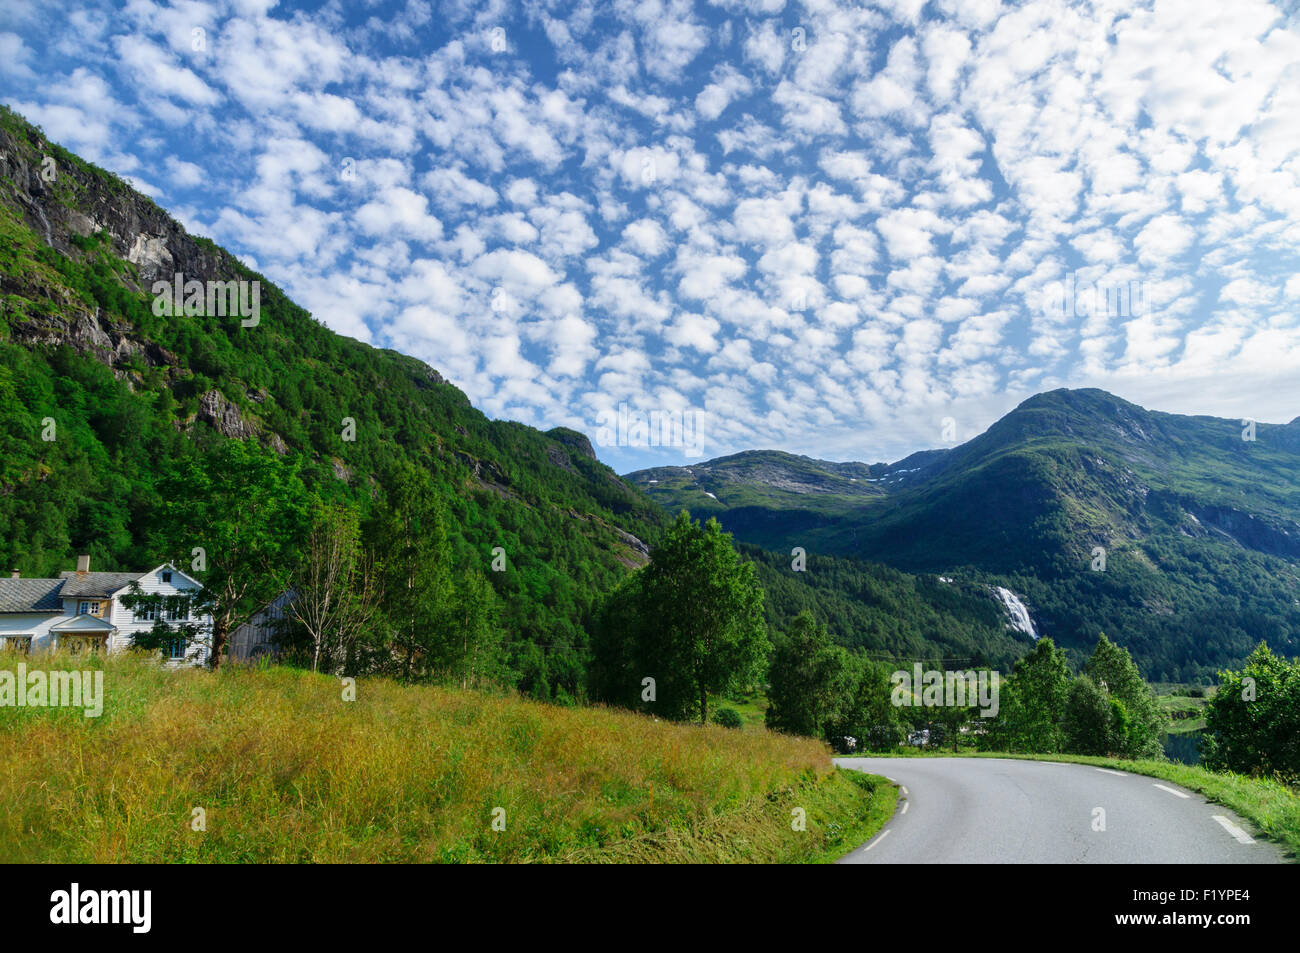 Mountain landscape with turning road and cirrostratus clouds, Norway Stock Photo